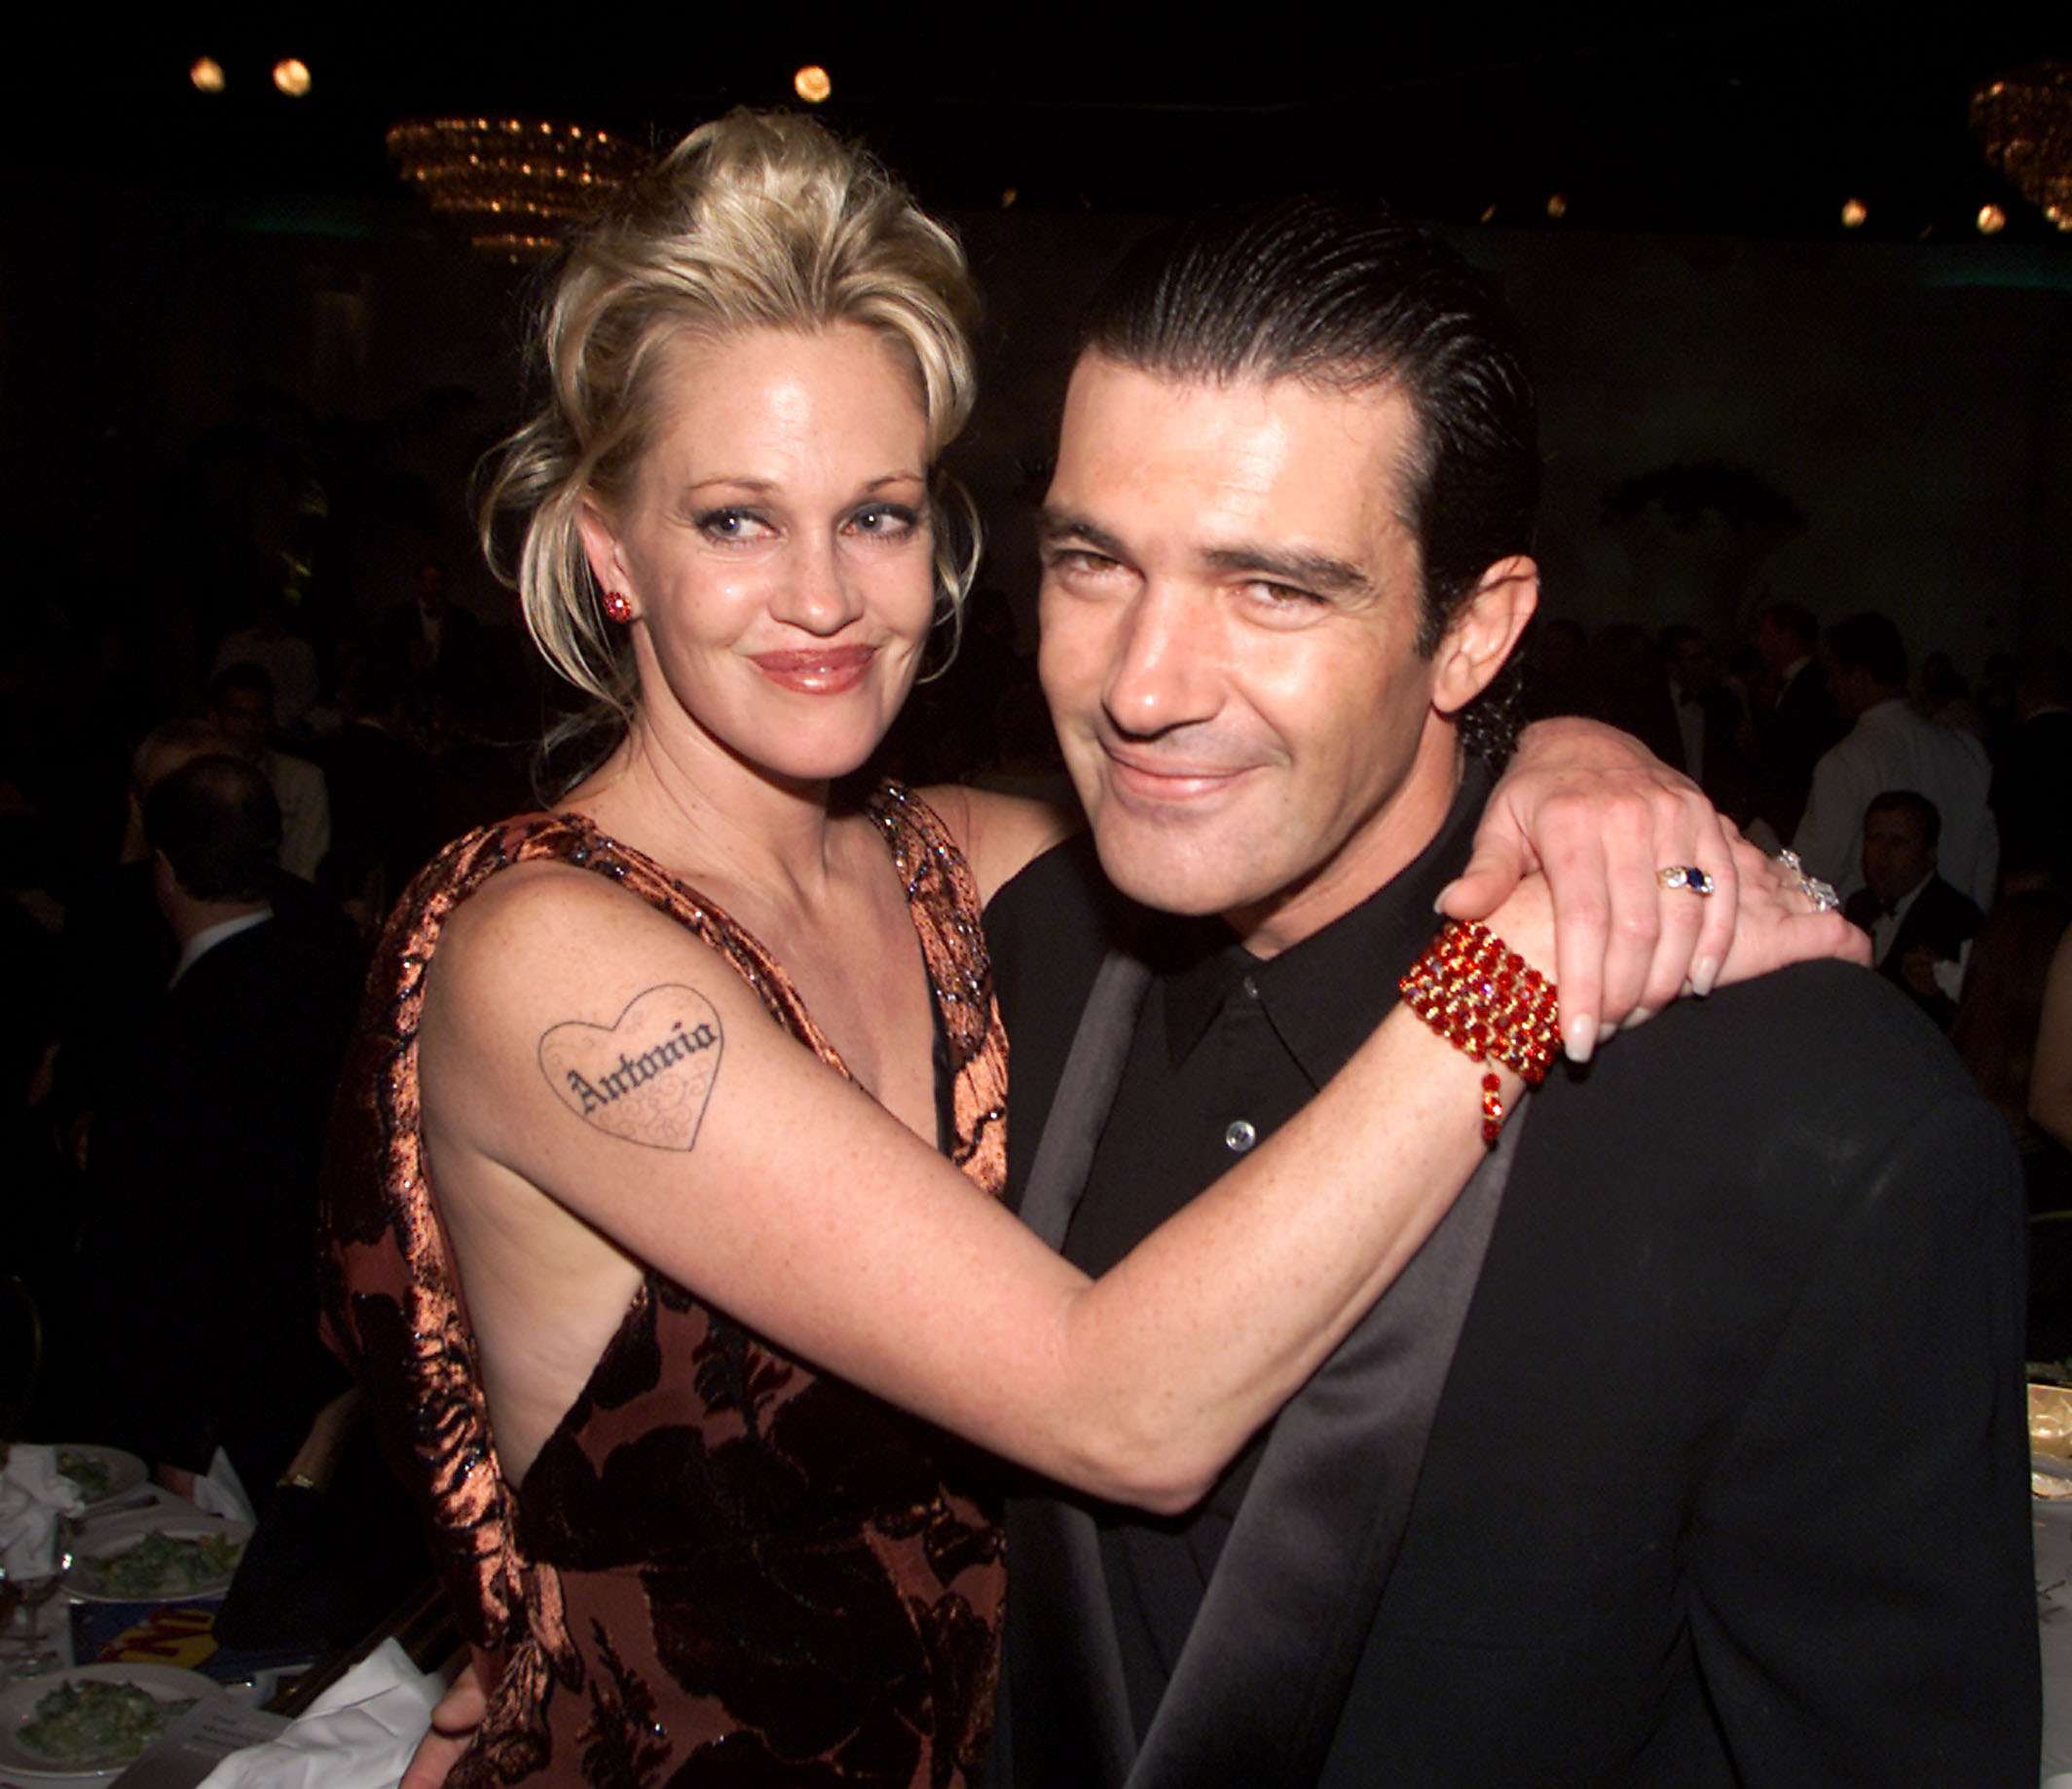 Melanie Griffith and Antonio Banderas at 'Hollywood Salutes Bruce Willis: An American Cinematheque Tribute' at the Beverly Hilton Hotel, Beverly Hills, on September 23, 2000. | Source: Getty Images